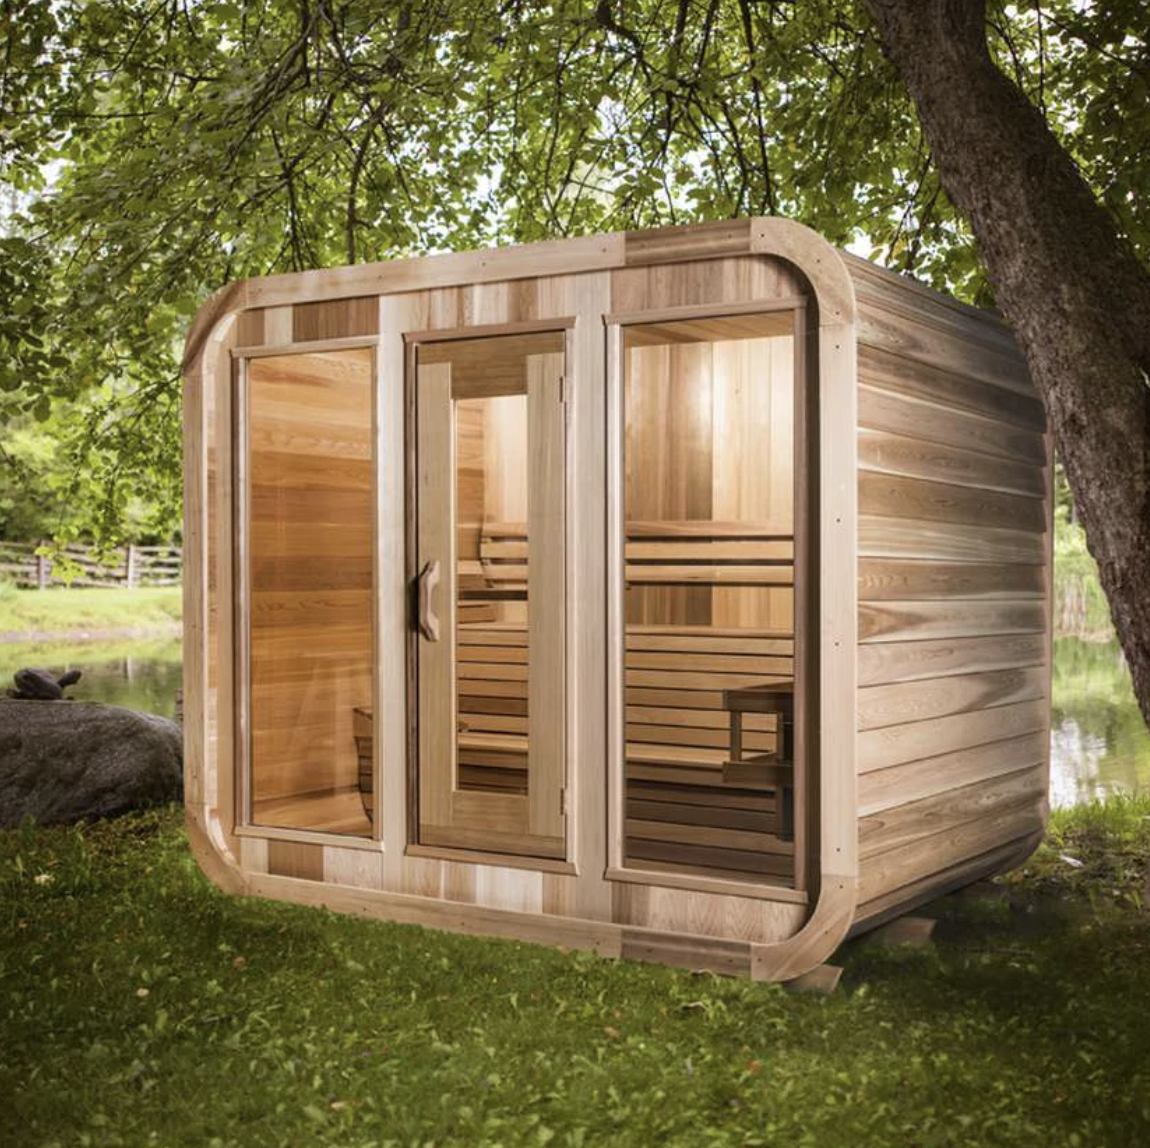 02 The Luxury Option - Looking for something splurge-worthy? Check out the Luna Outdoor Sauna. It’s almost completely customizable - choose your exterior wood type, interior seating arrangement and design, and you can even opt for upgrades like lounge seating or an added porch.